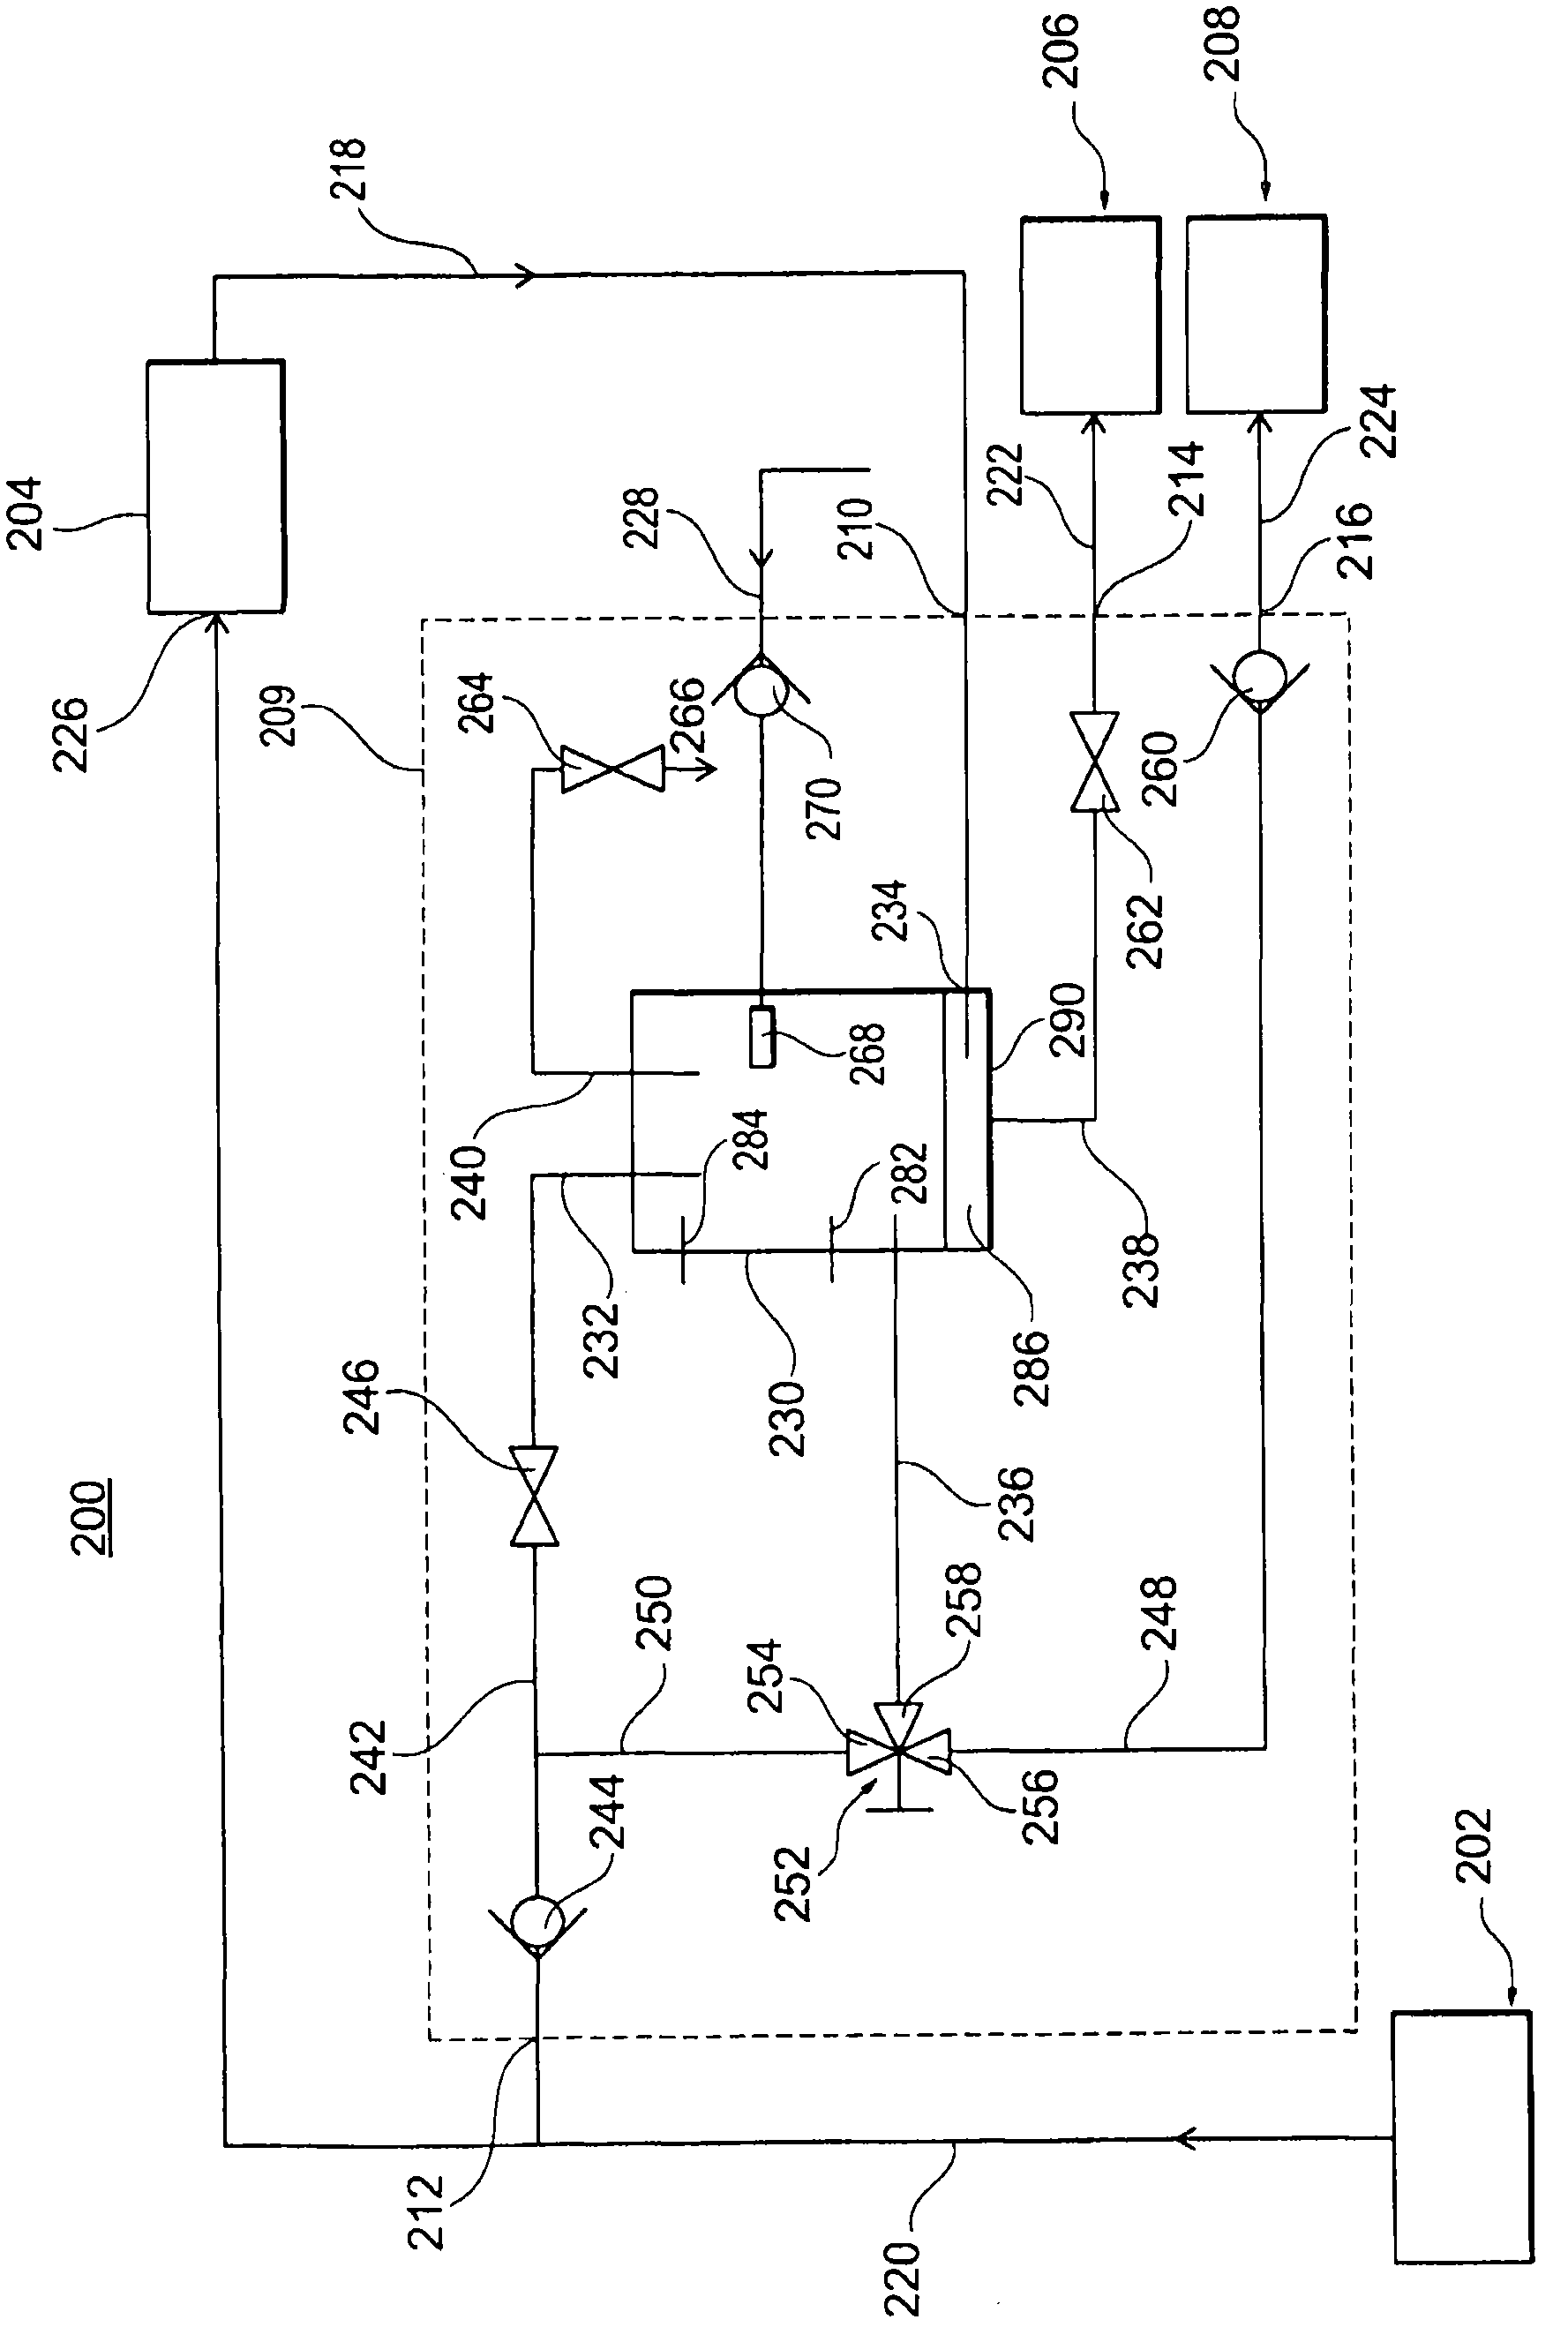 A water storage and distribution system having a water tank by pass